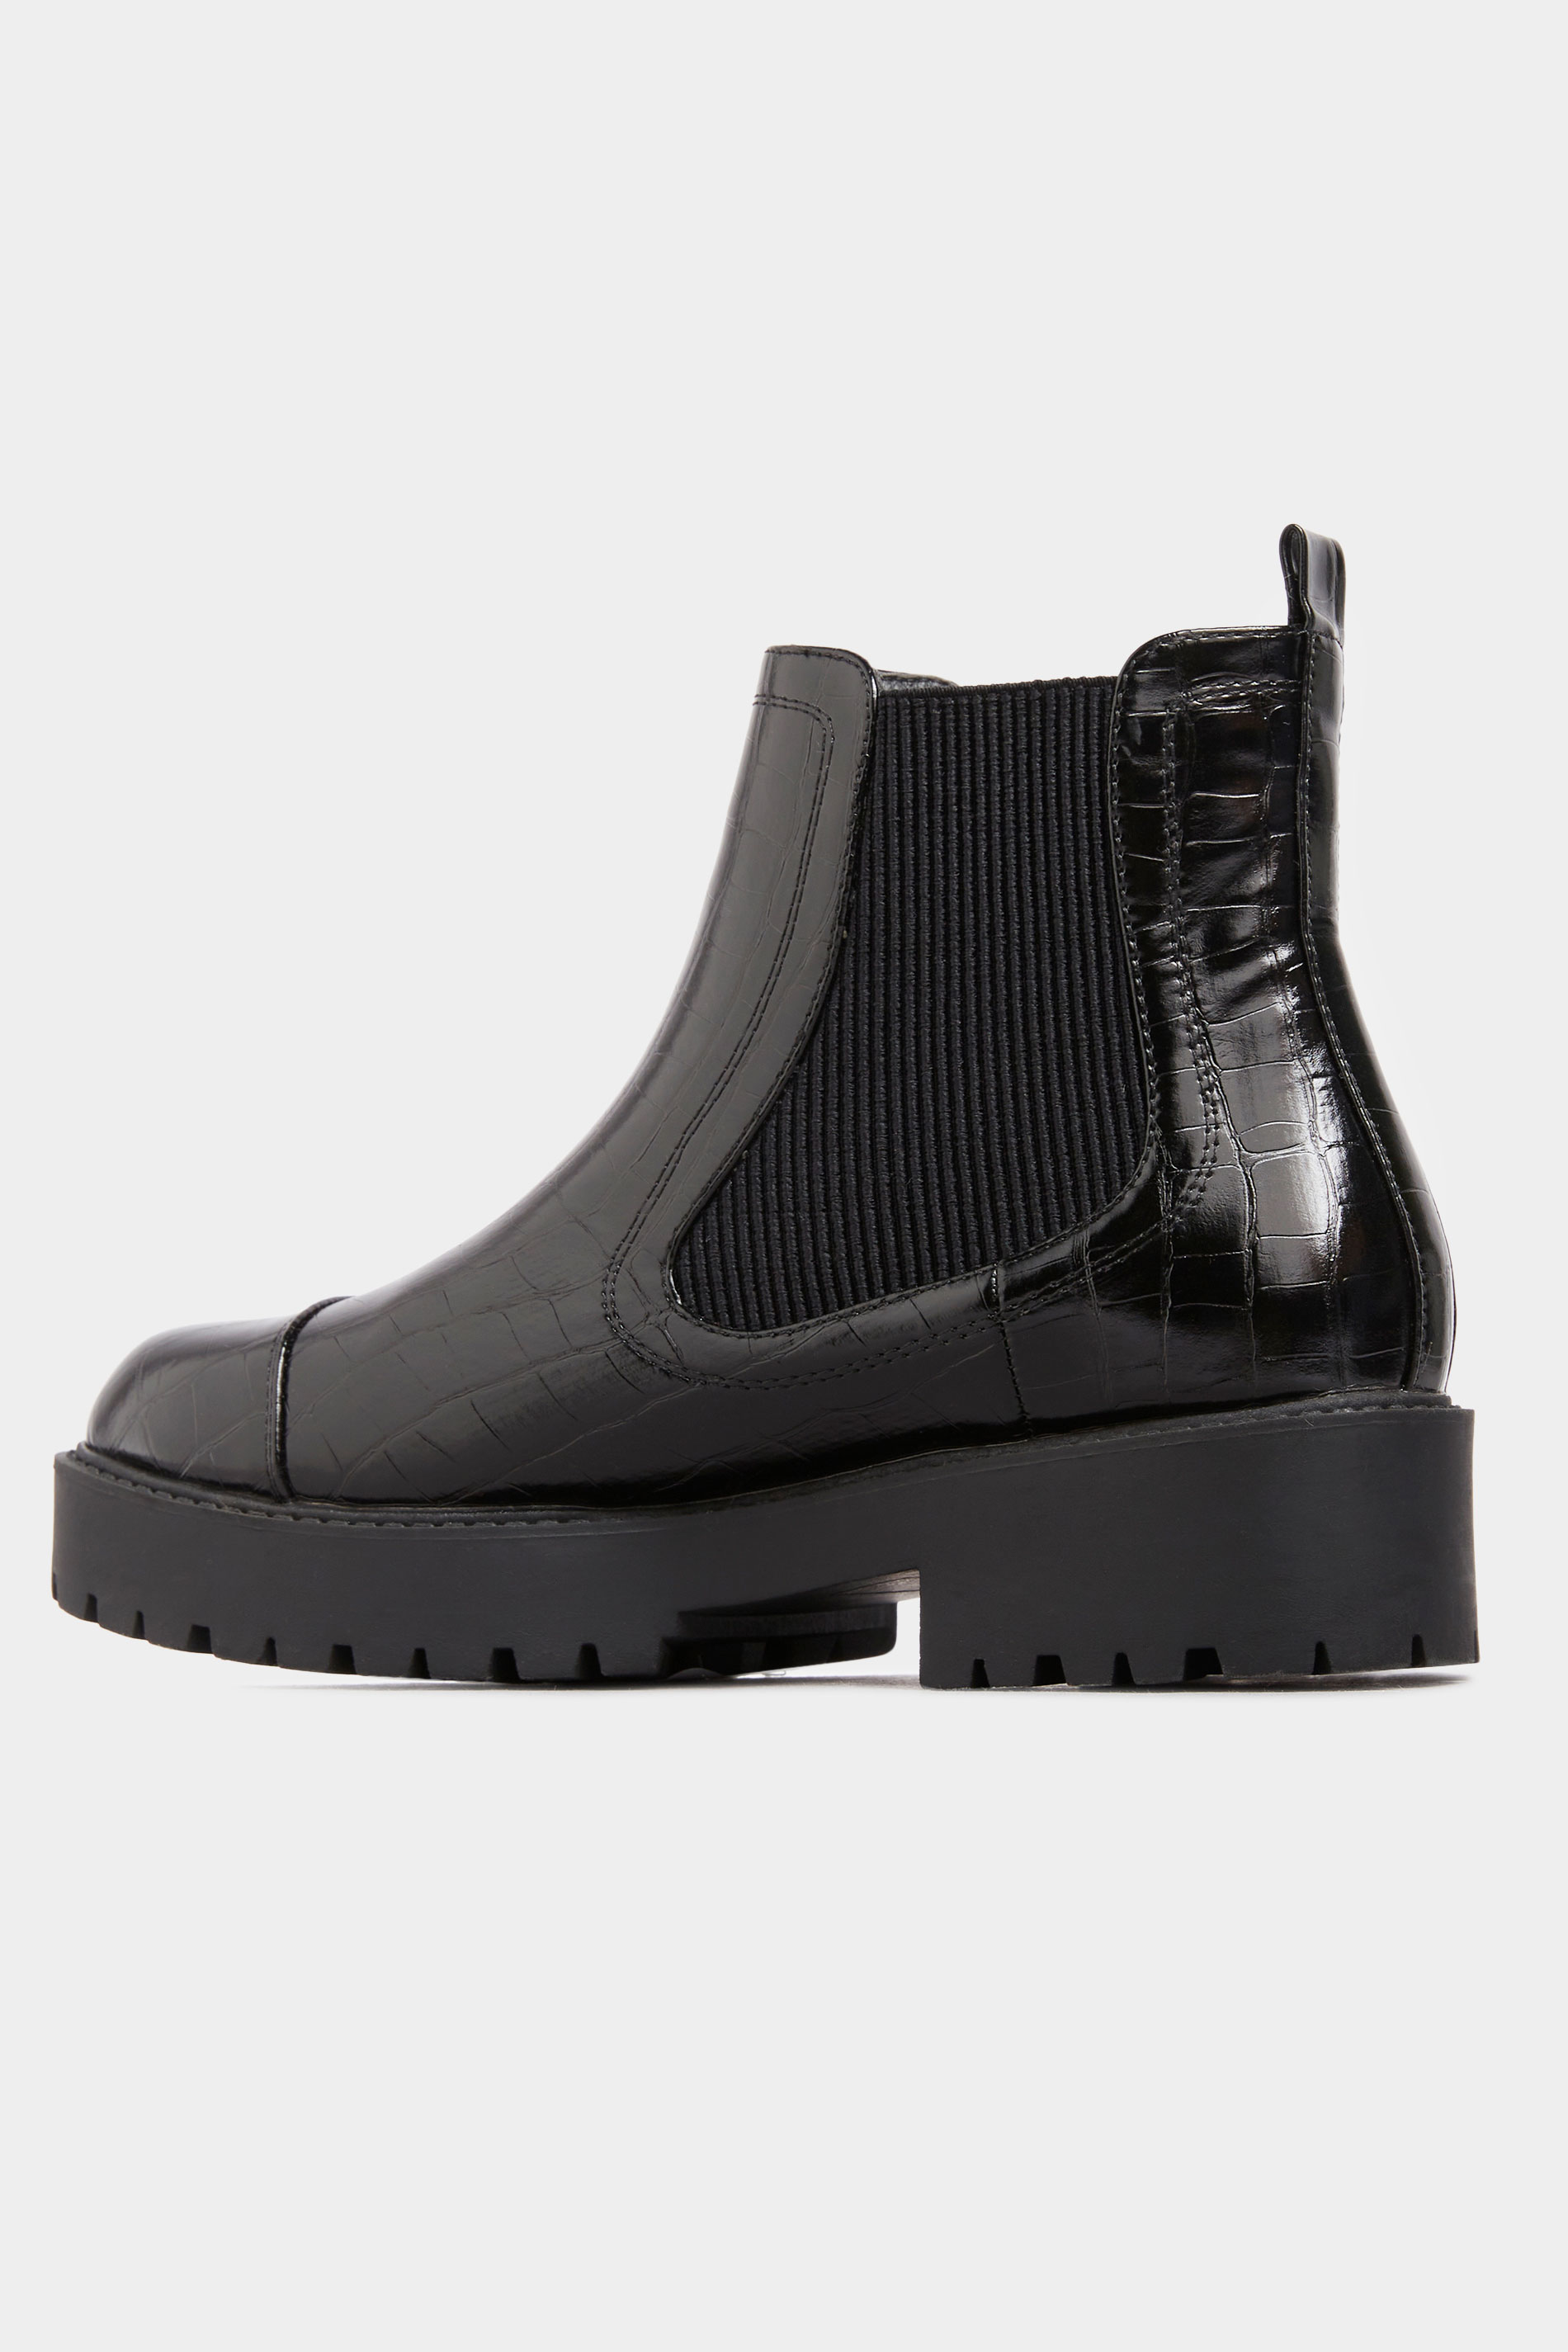 LIMITED COLLECTION Black Patent Croc Platform Chelsea Boots In Wide Fit ...